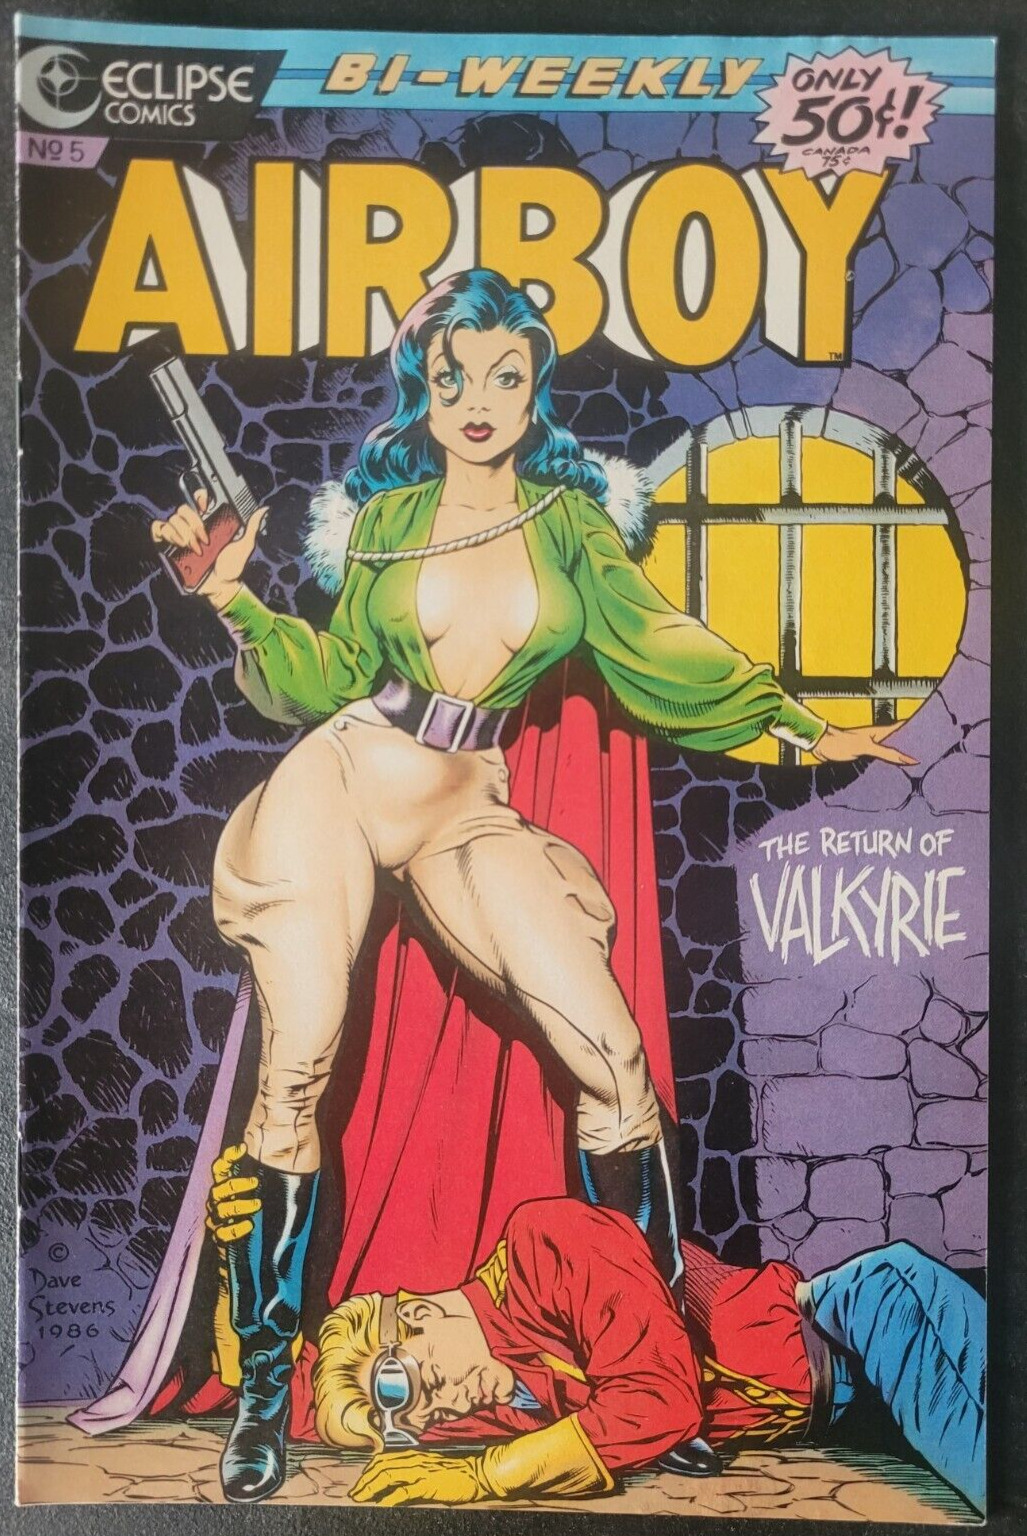 AIRBOY #1-50 (1986) ECLIPSE COMICS NEAR COMPLETE SET OF 49 DAVE STEVENS #5 COVER